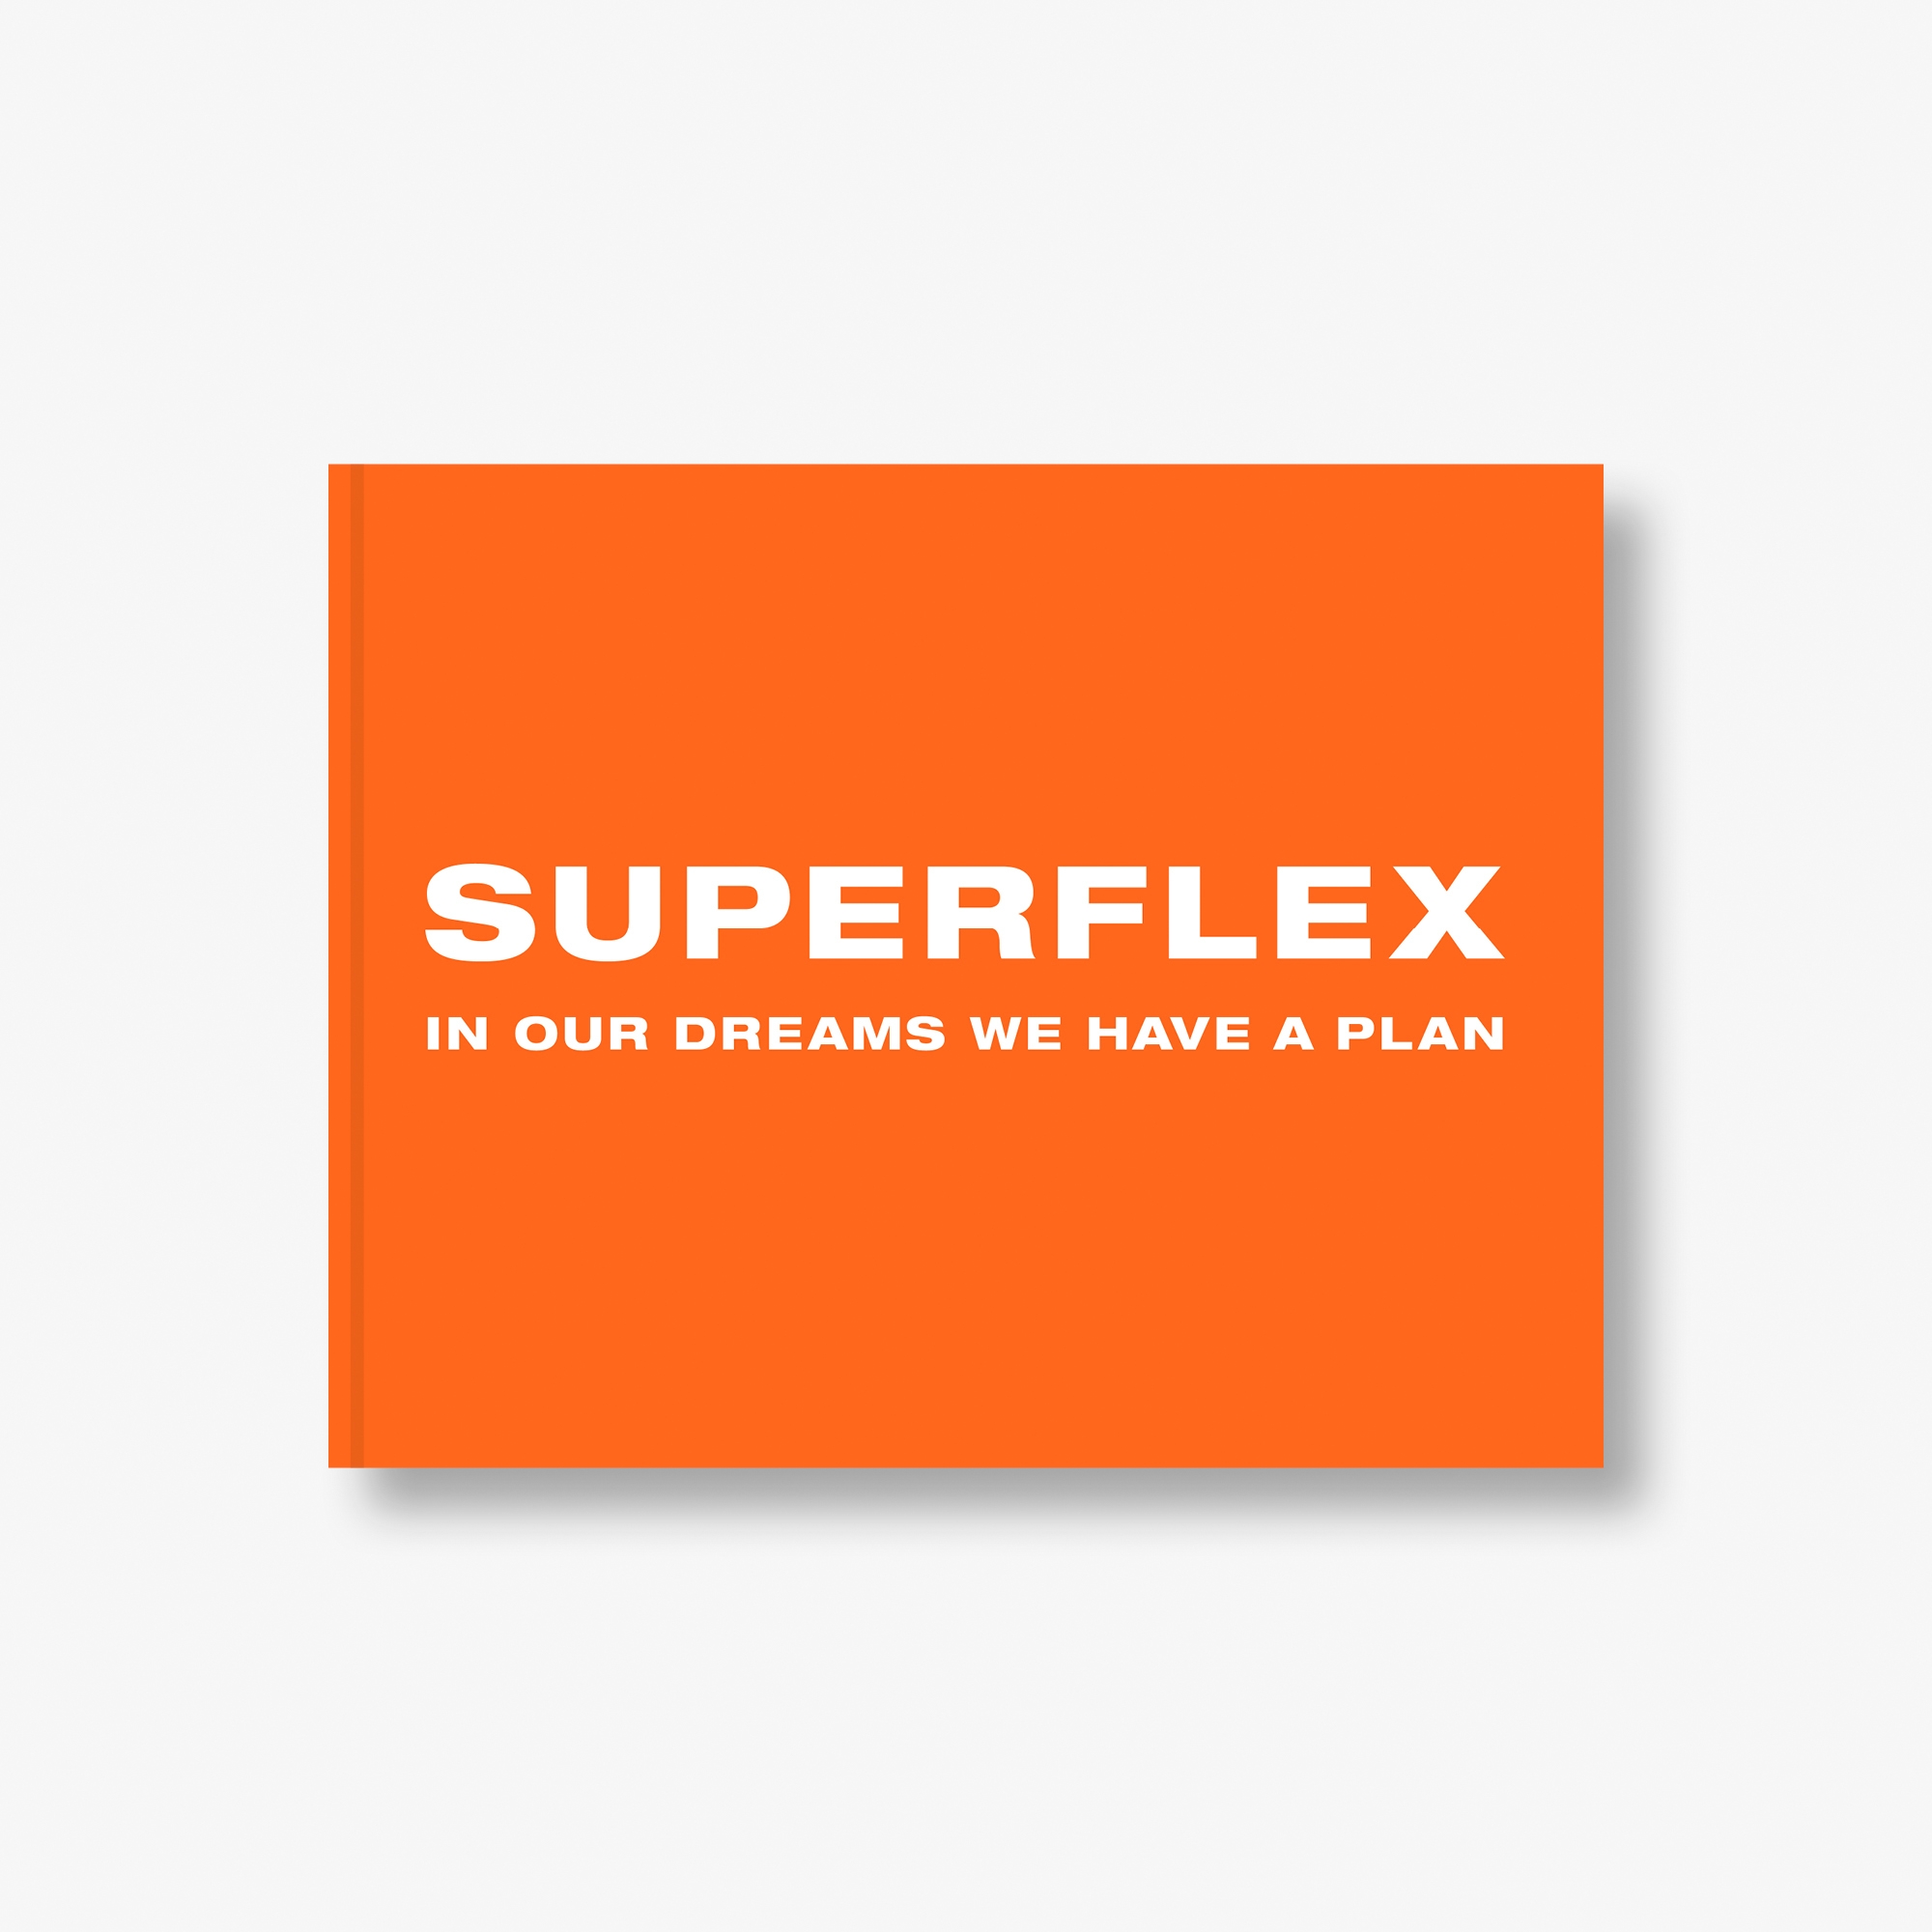 SUPERFLEX: In our dreams we have a plan